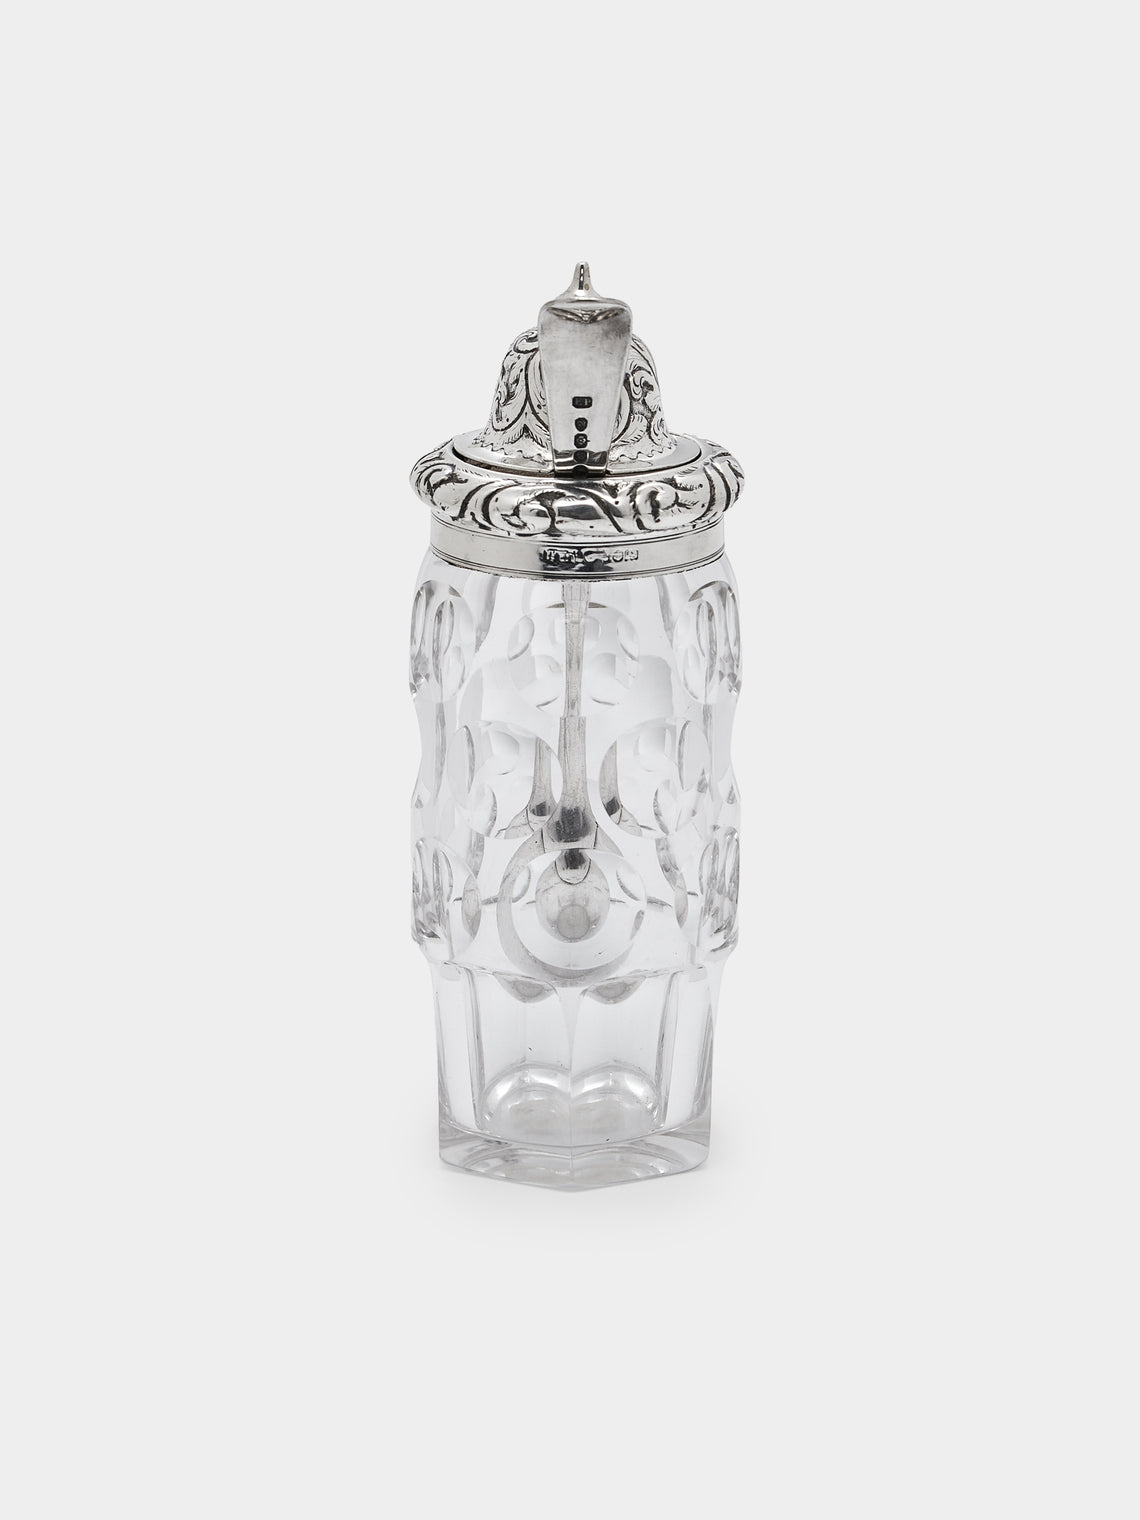 Antique and Vintage - 1900s Silver and Glass Jar -  - ABASK - 